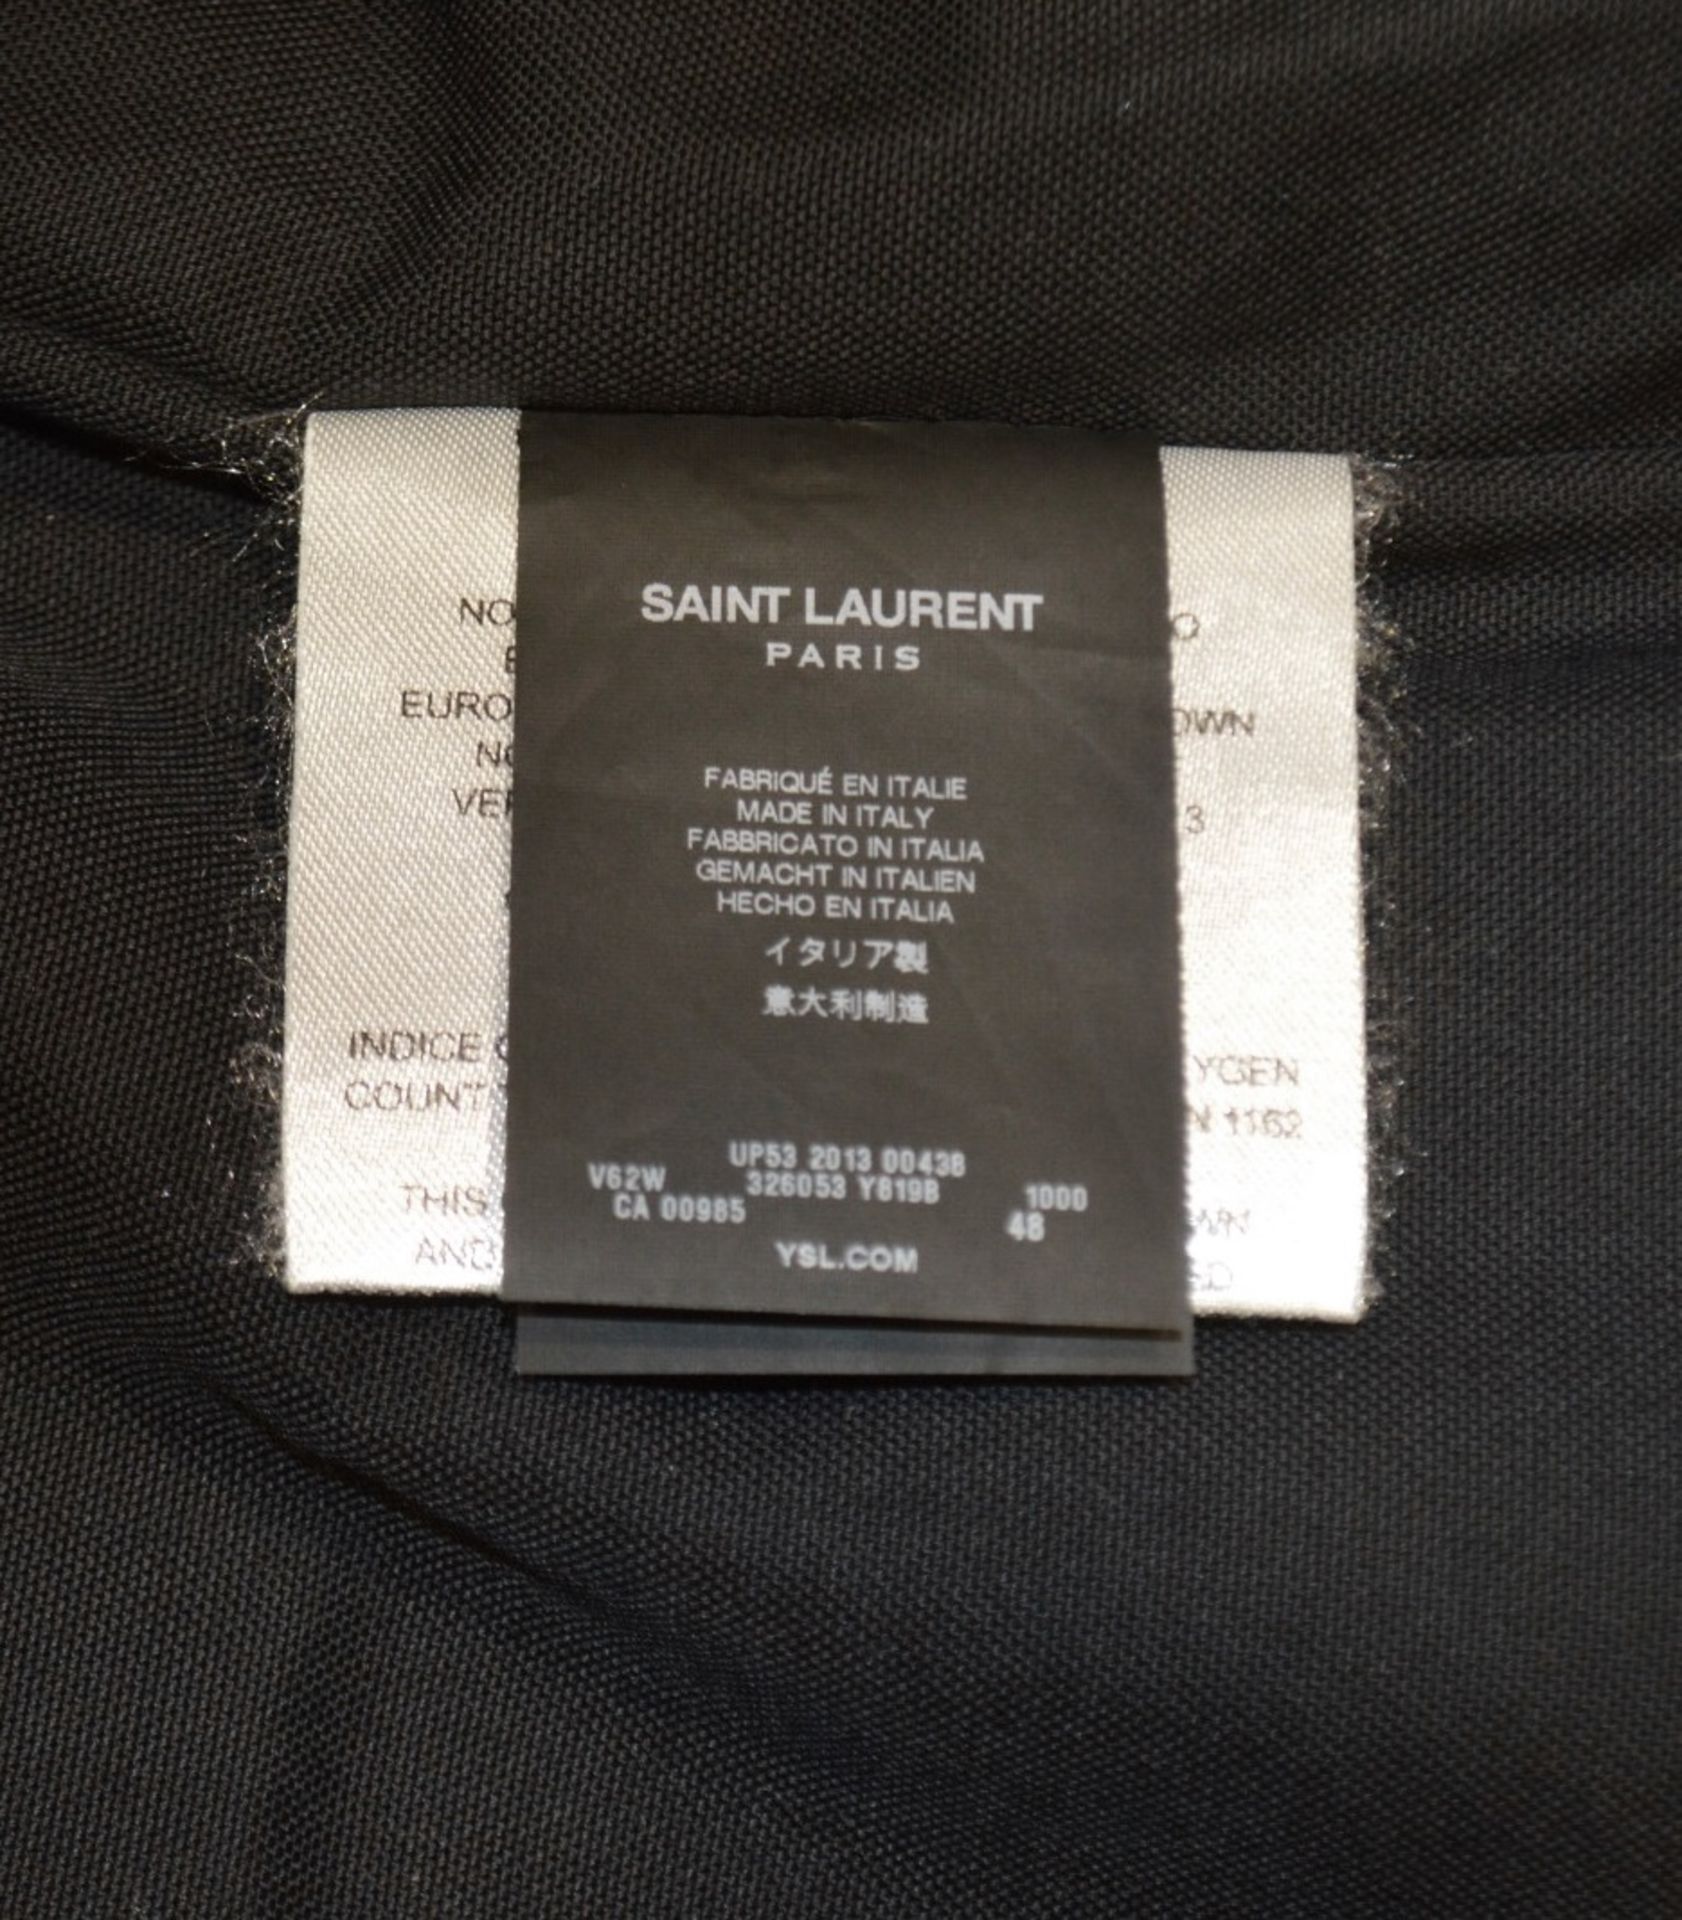 1 x Men's Genuine Yves Saint Laurant Gillet / Body Warmer In Black With Leather Panelling - Image 7 of 8